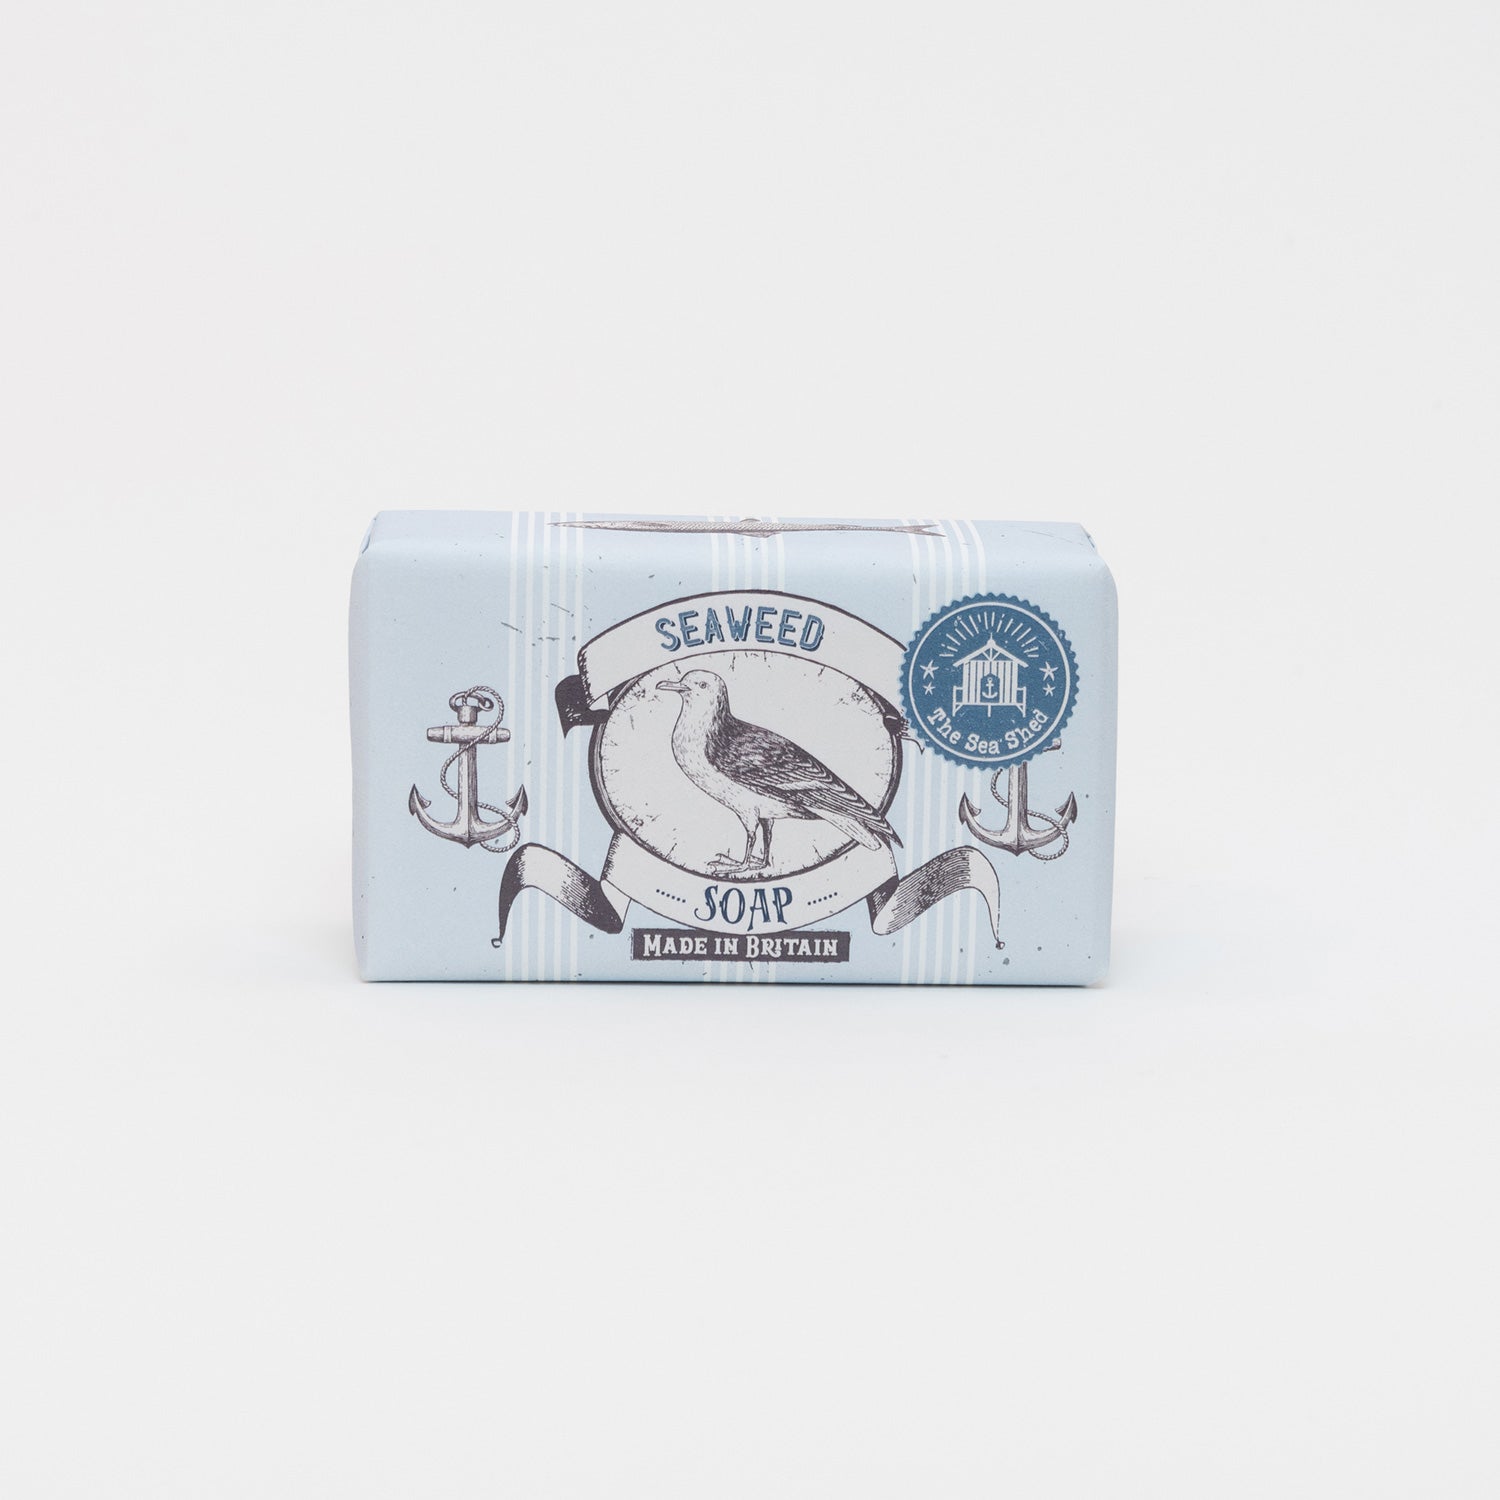 A photo of packaged Cornish Seaweed Soap on a white background. The packaging is blue and white with illustrations of a seagull and anchors.